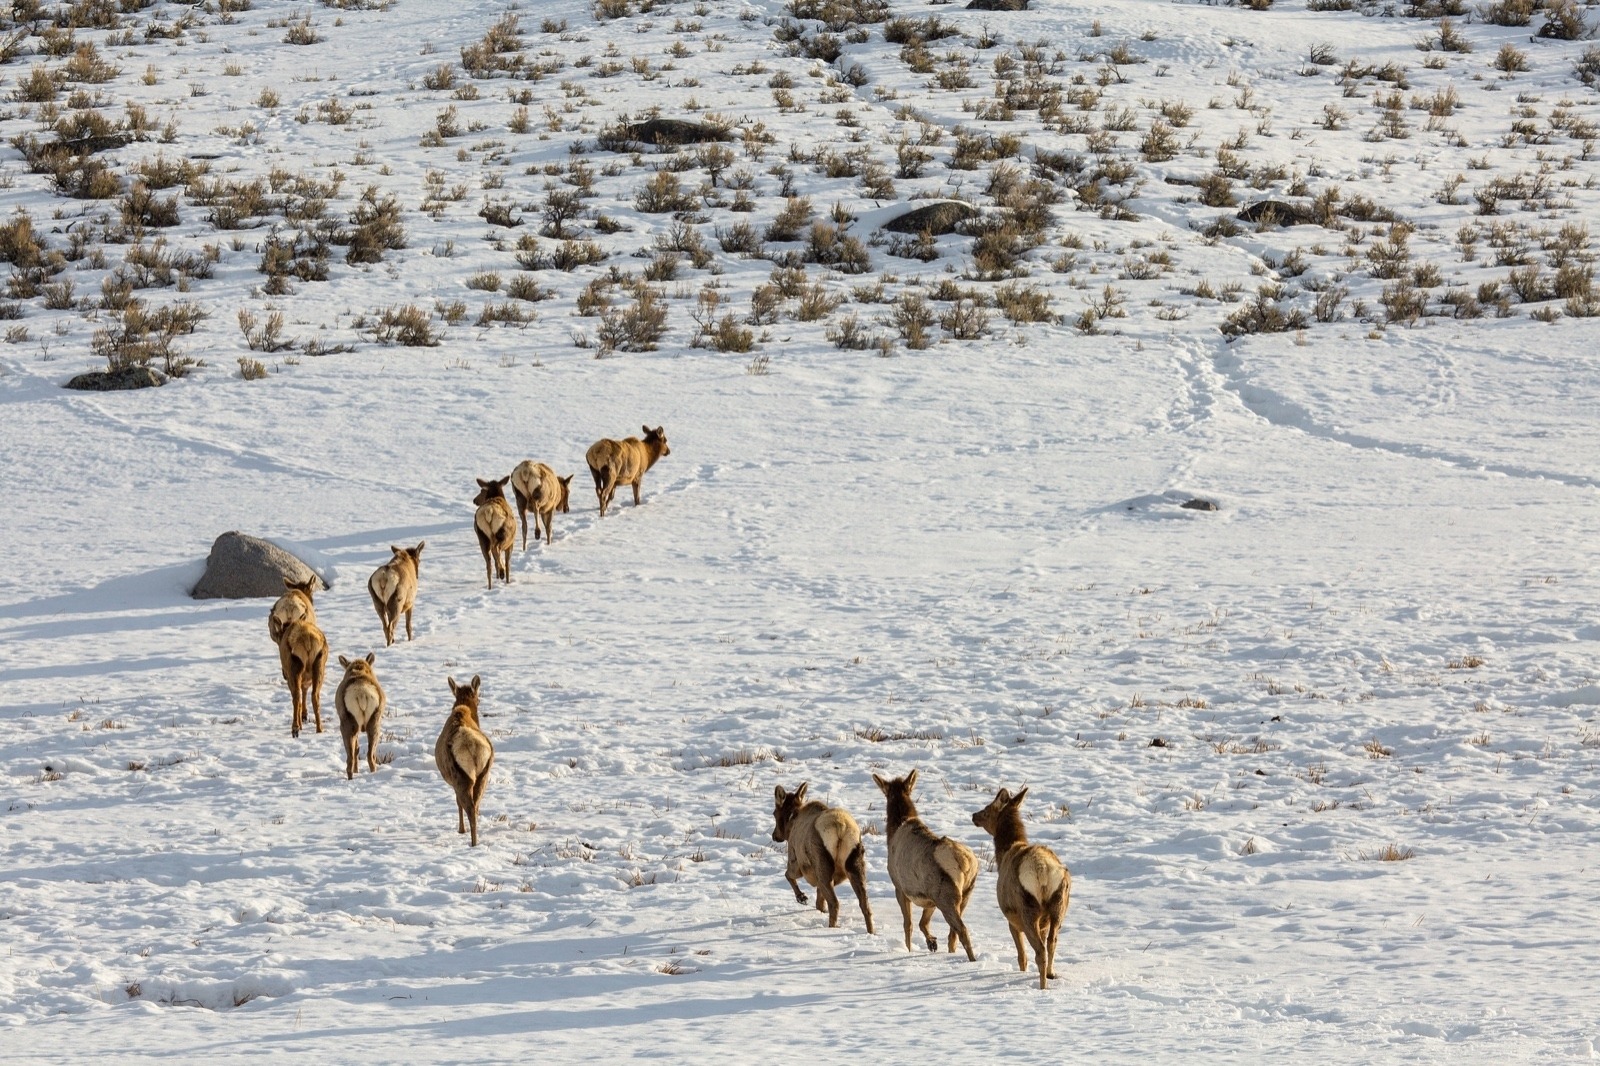 Elk on the move in Yellowstone. Photo courtesy Neal Herbert/NPS